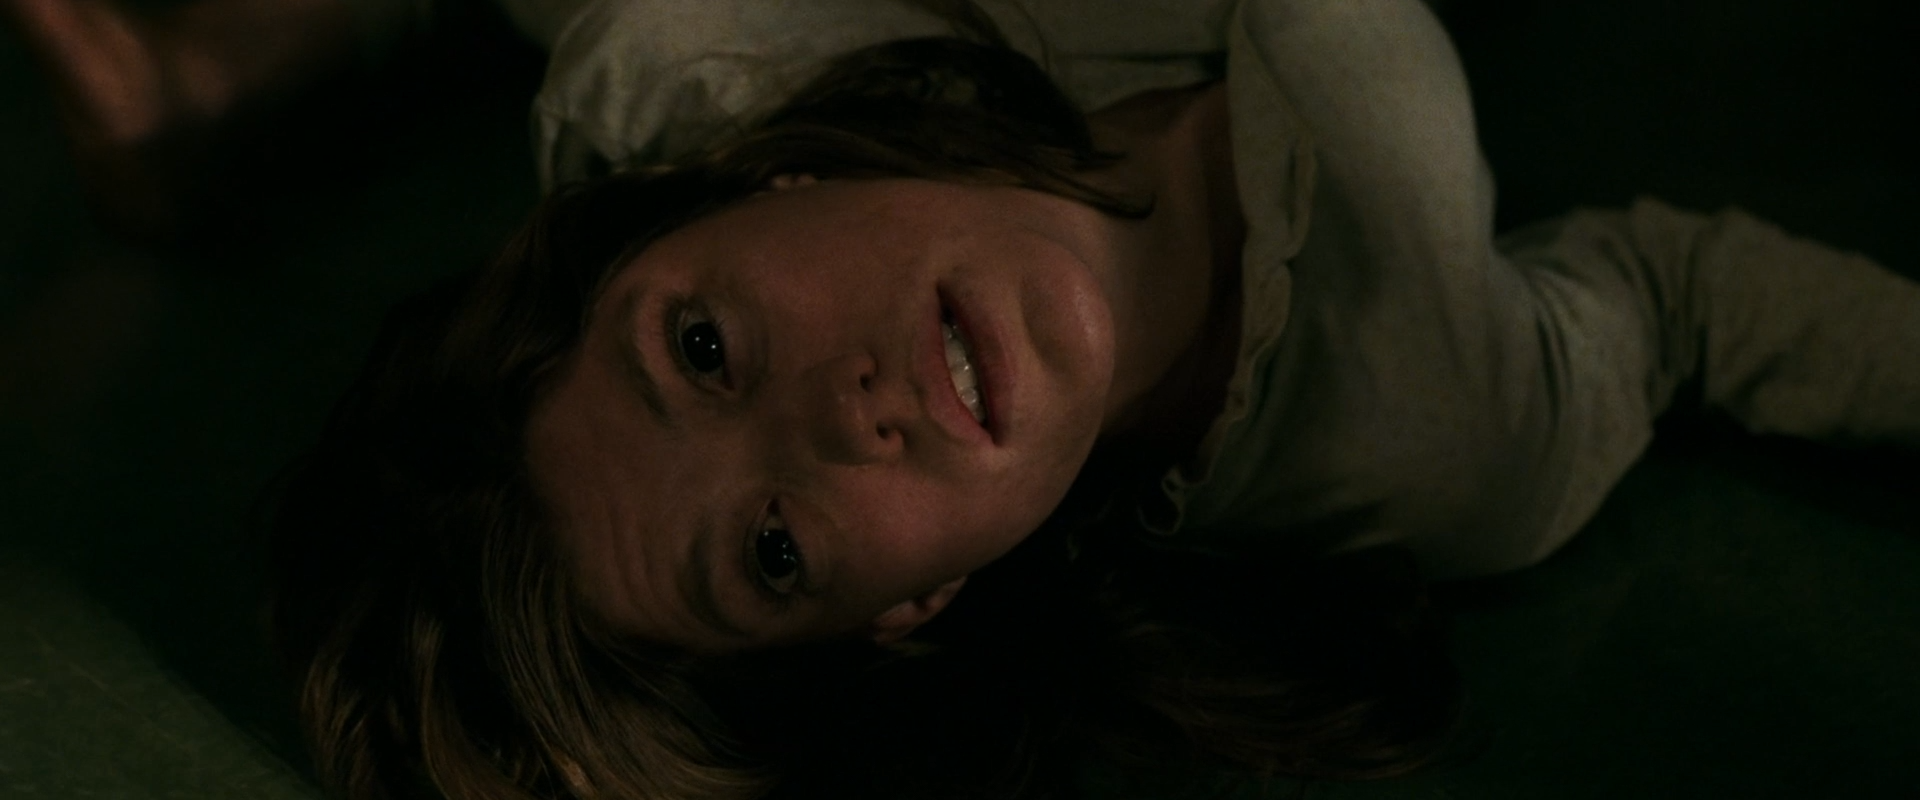 The.Exorcism.of.Emily.Rose.2005.UNRATED.1080p.BDRip.mkv_snapshot_00.51.34 2...